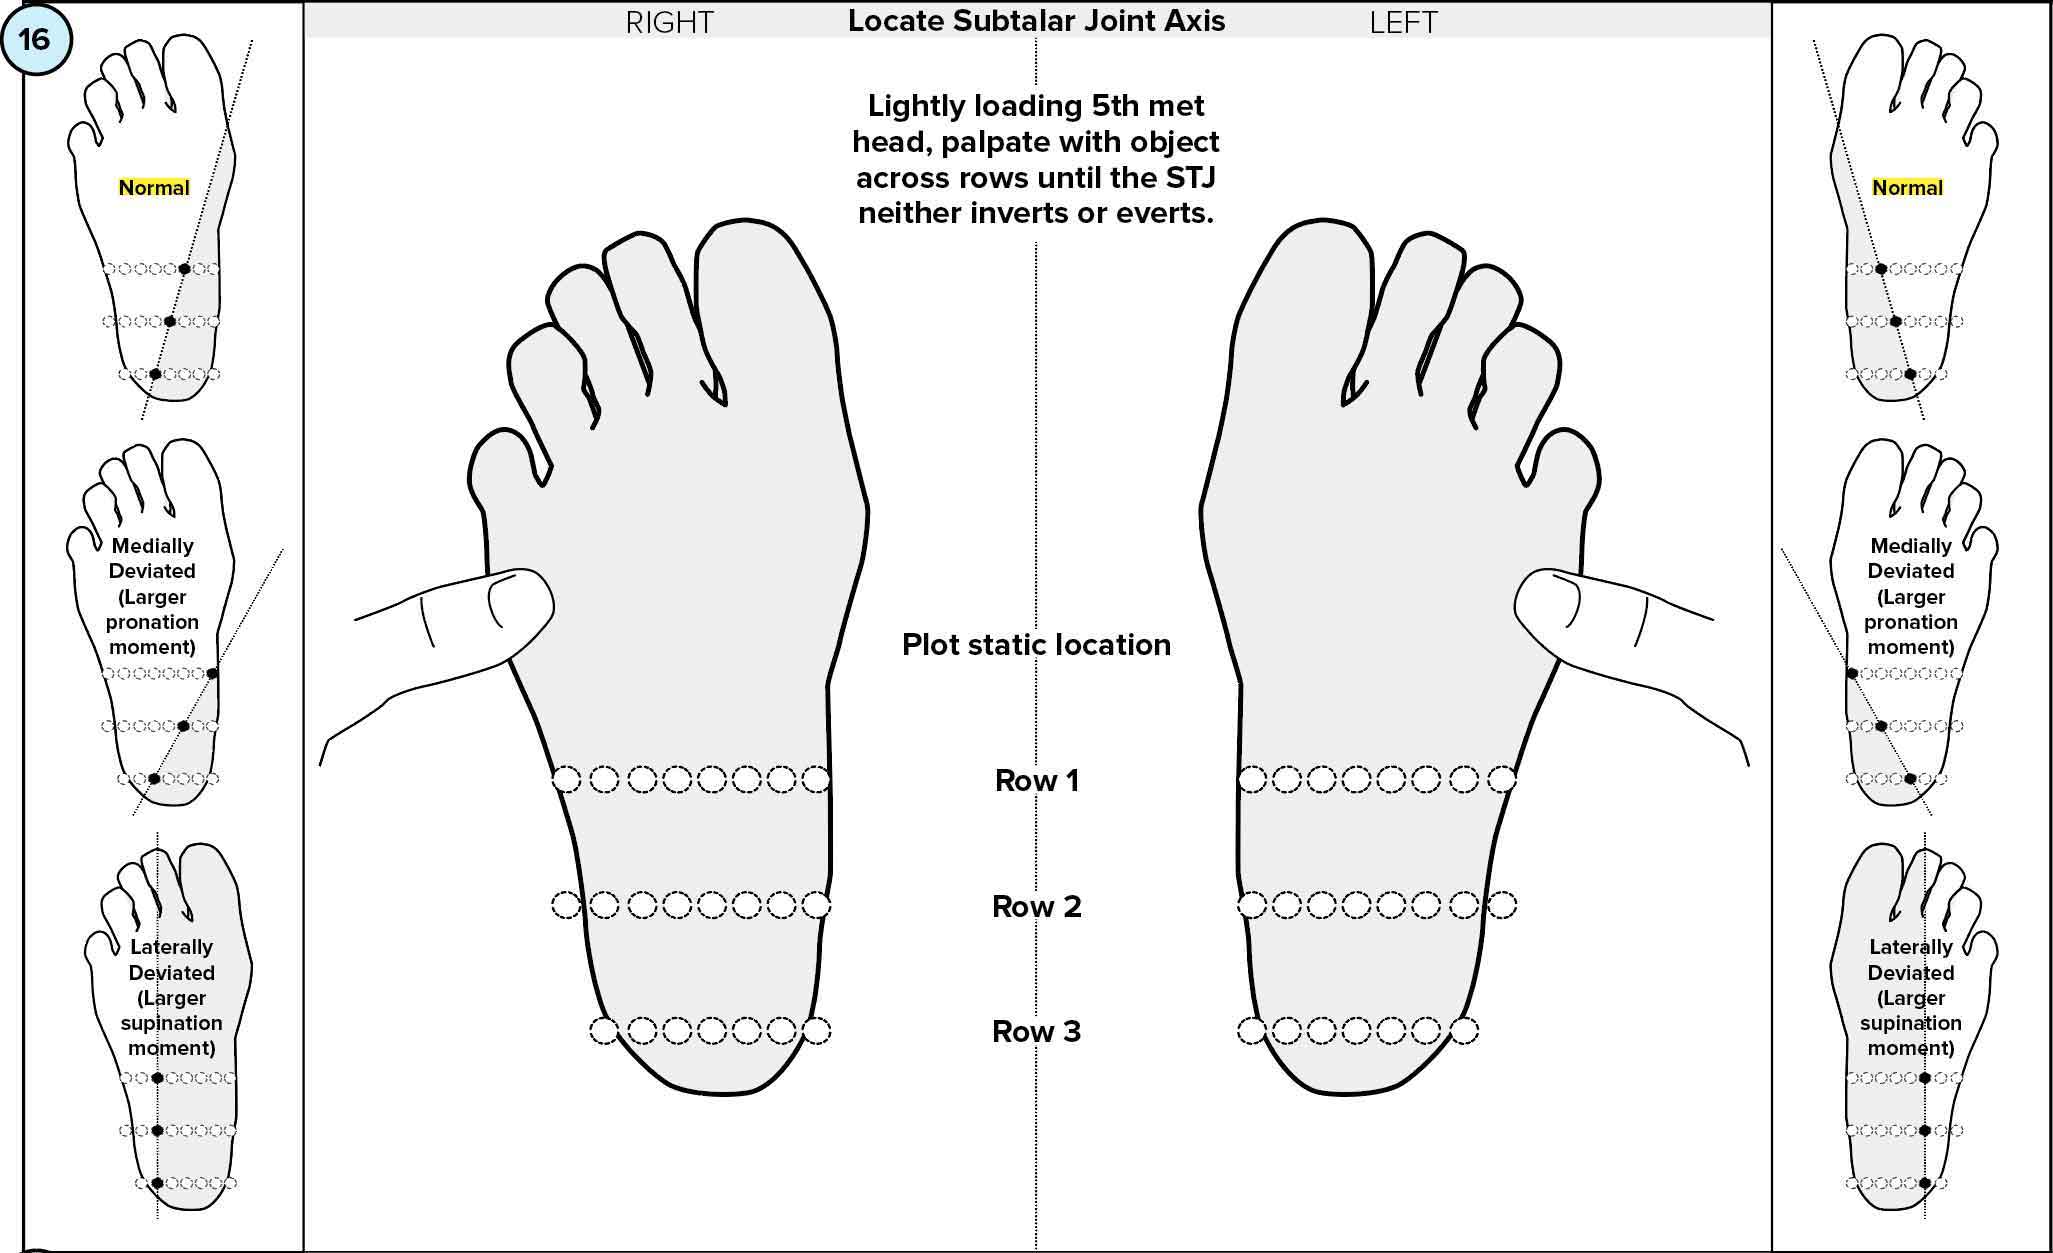 Locating Subtalar Joint Axis